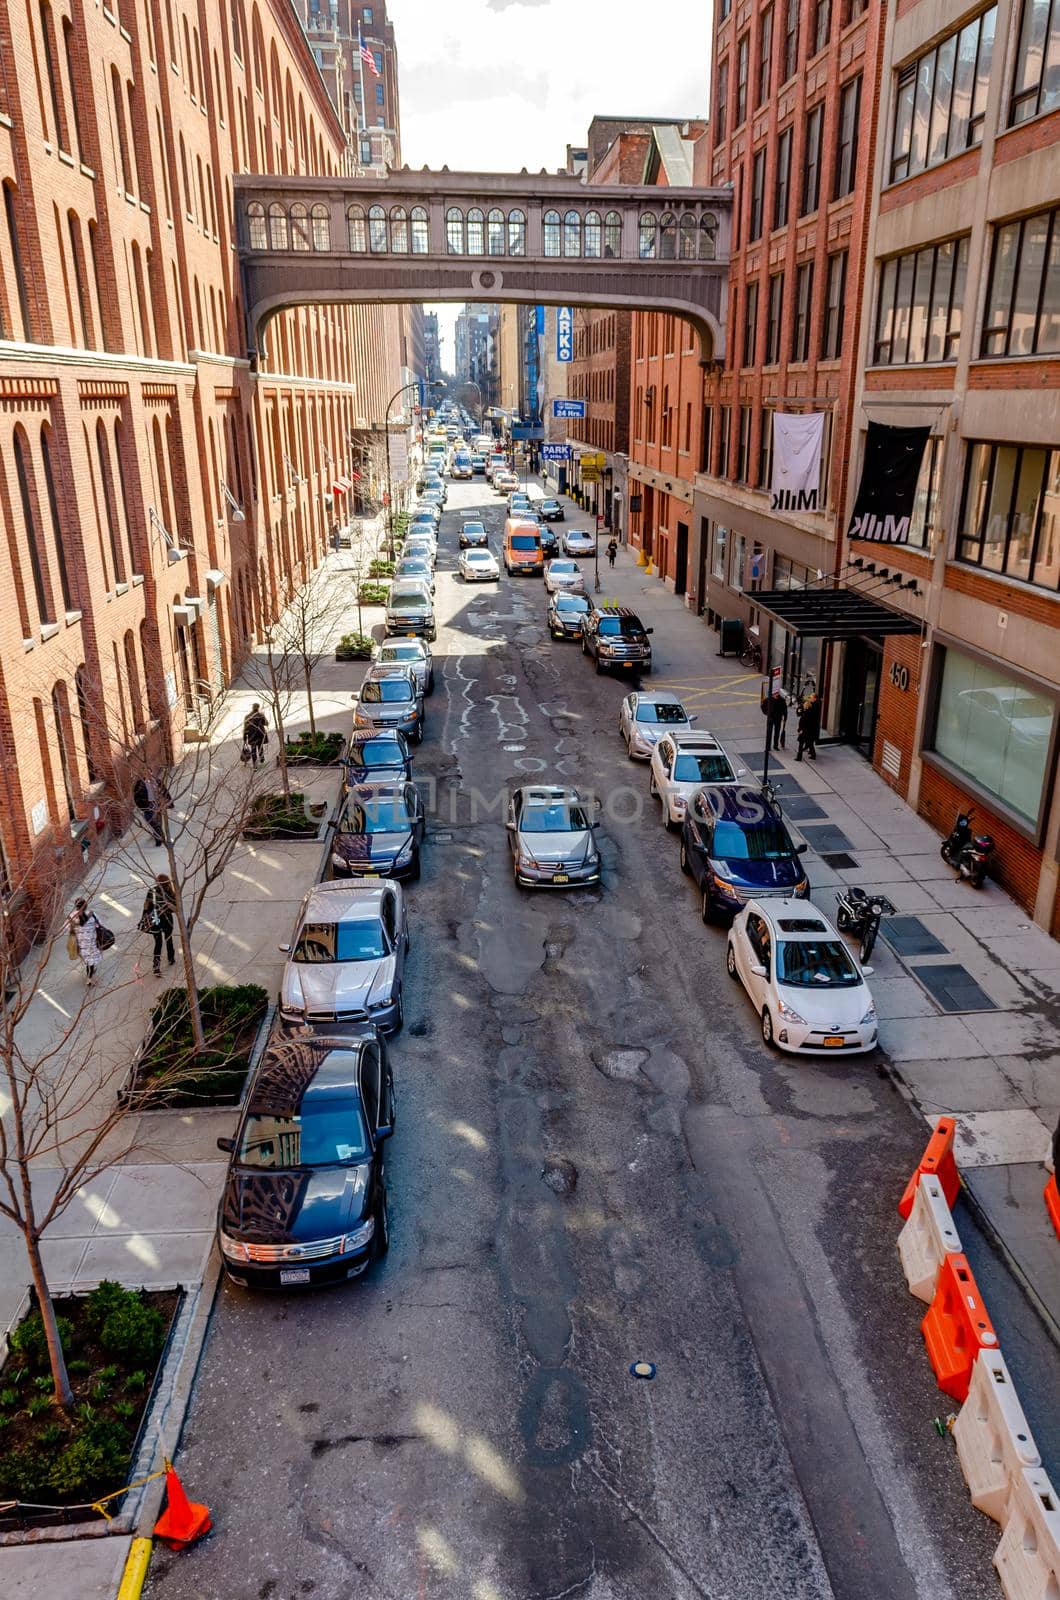 City street with lots of parked Cars in Chelsea, NYC, aerial view from the High Line Rooftop Park by bildgigant